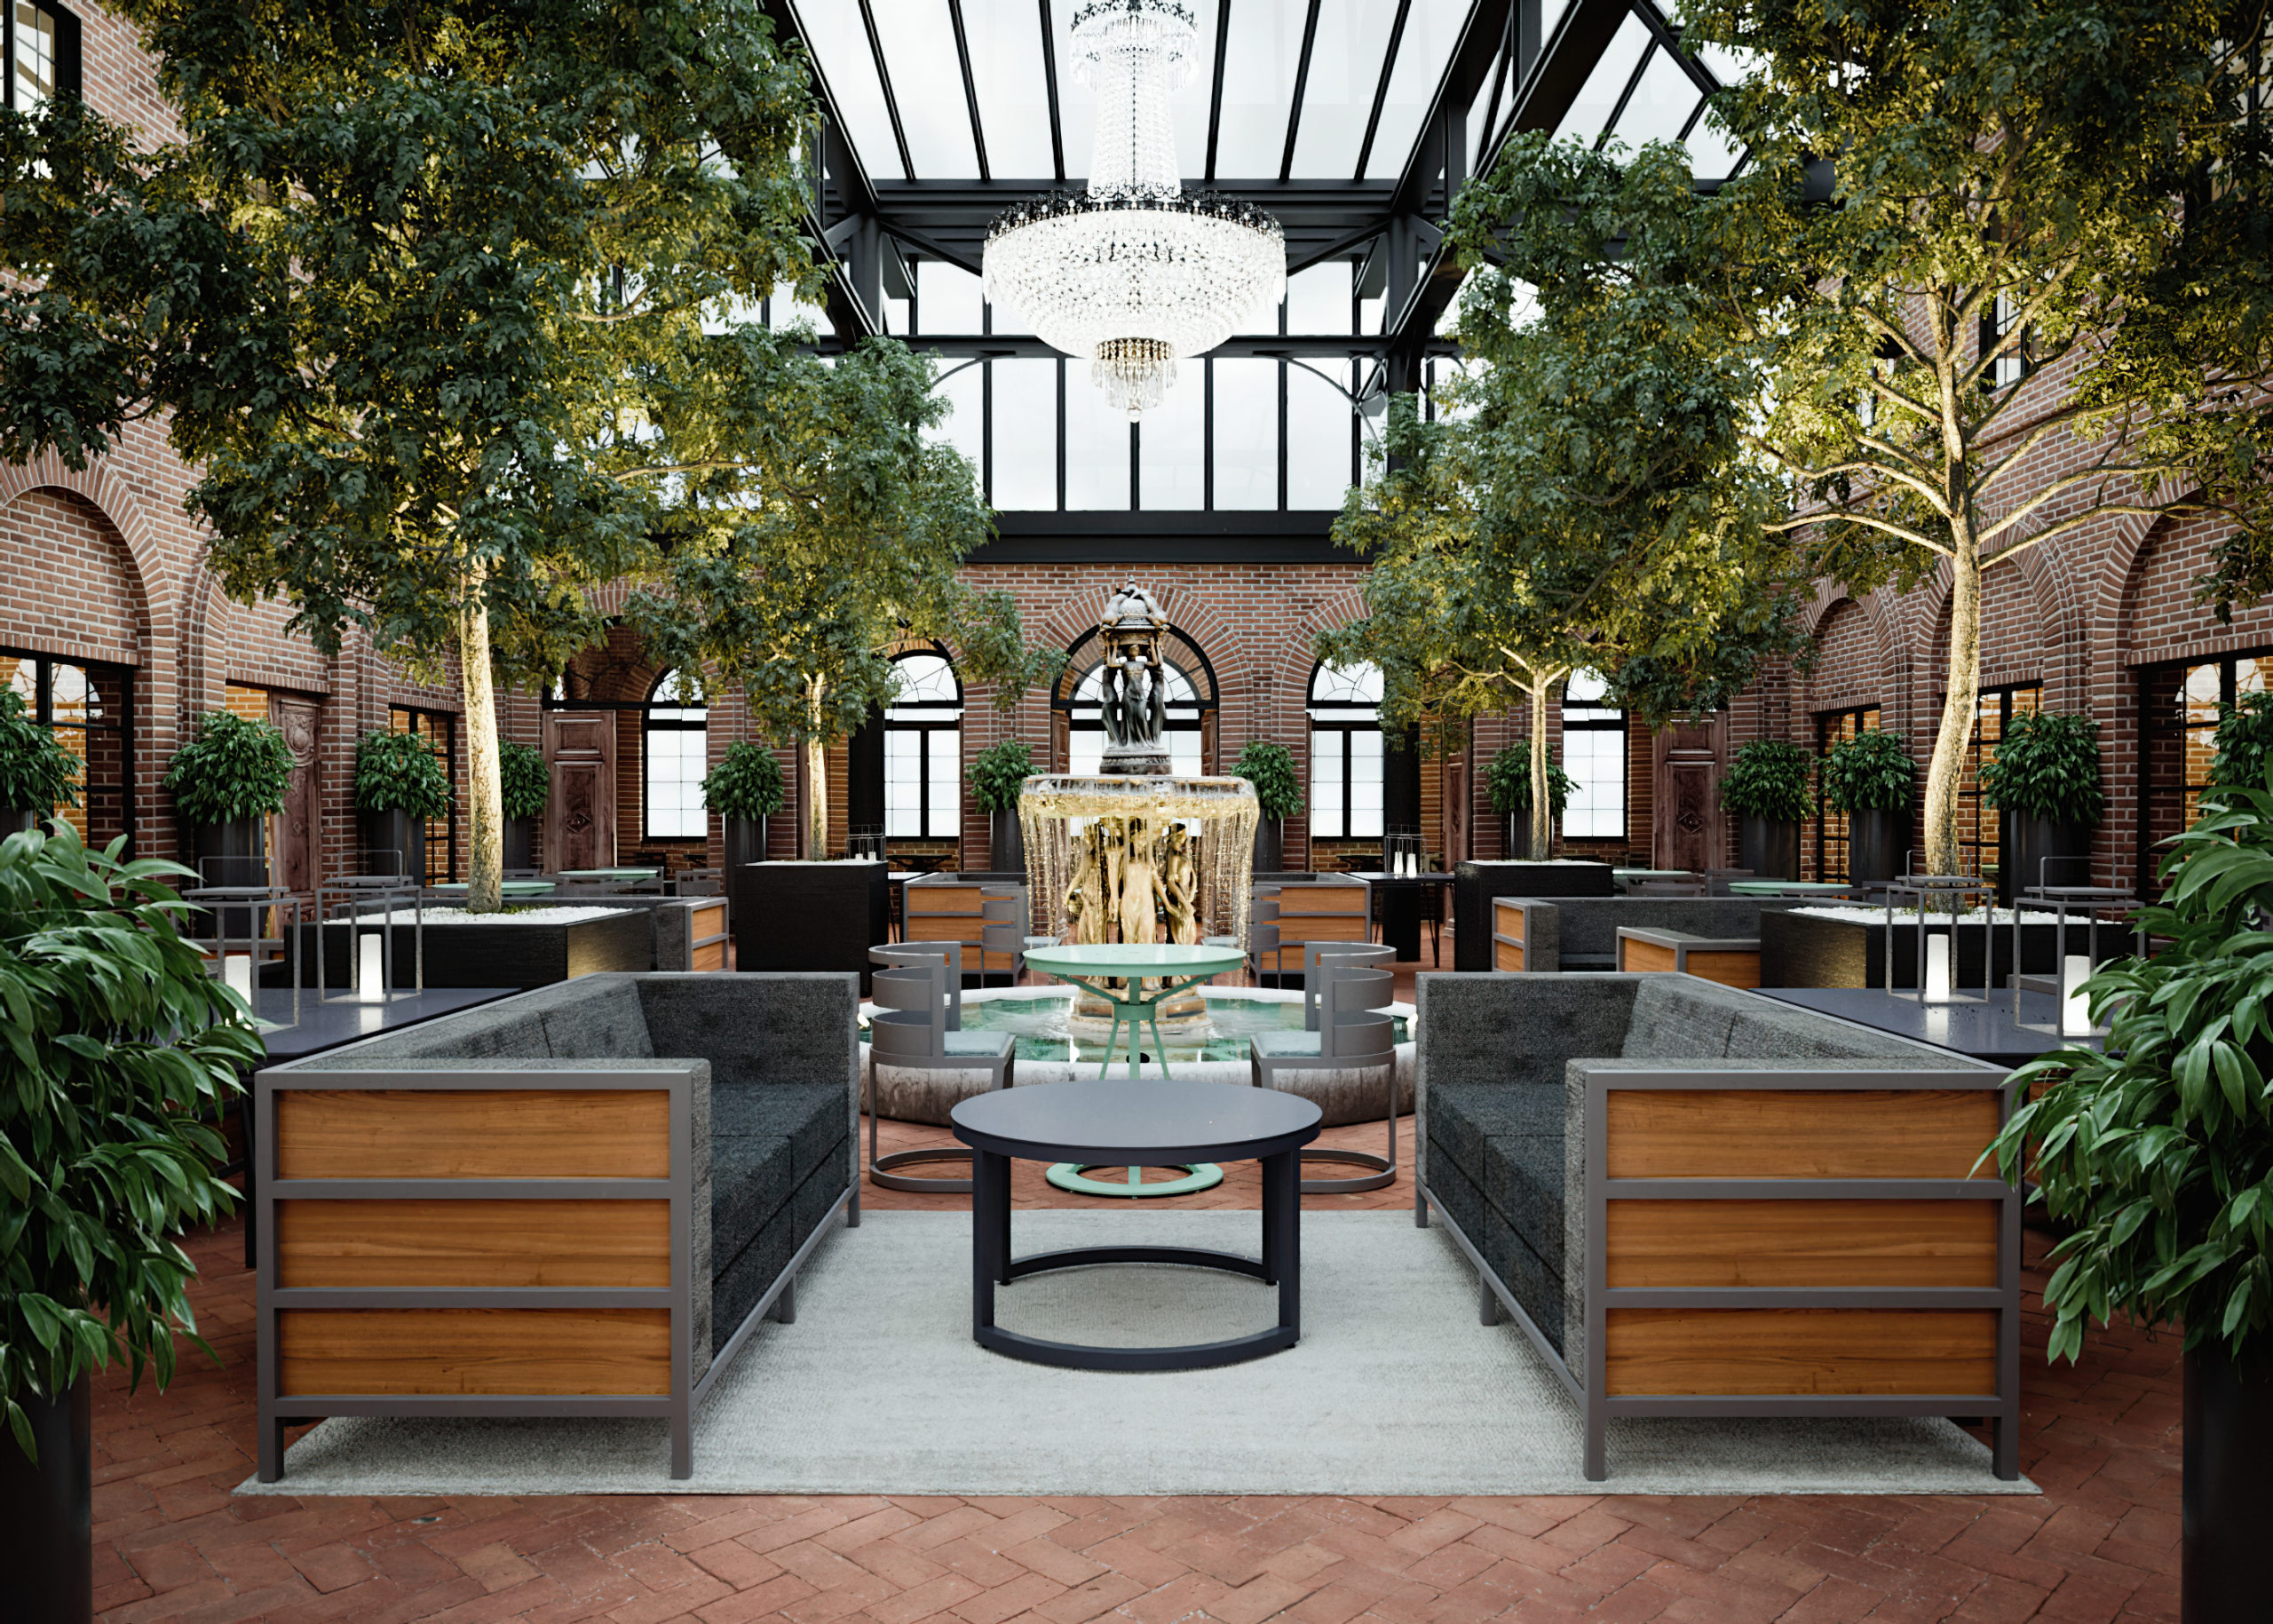 South Park Mall - Charlotte, NC - Benchmark Contract Furniture